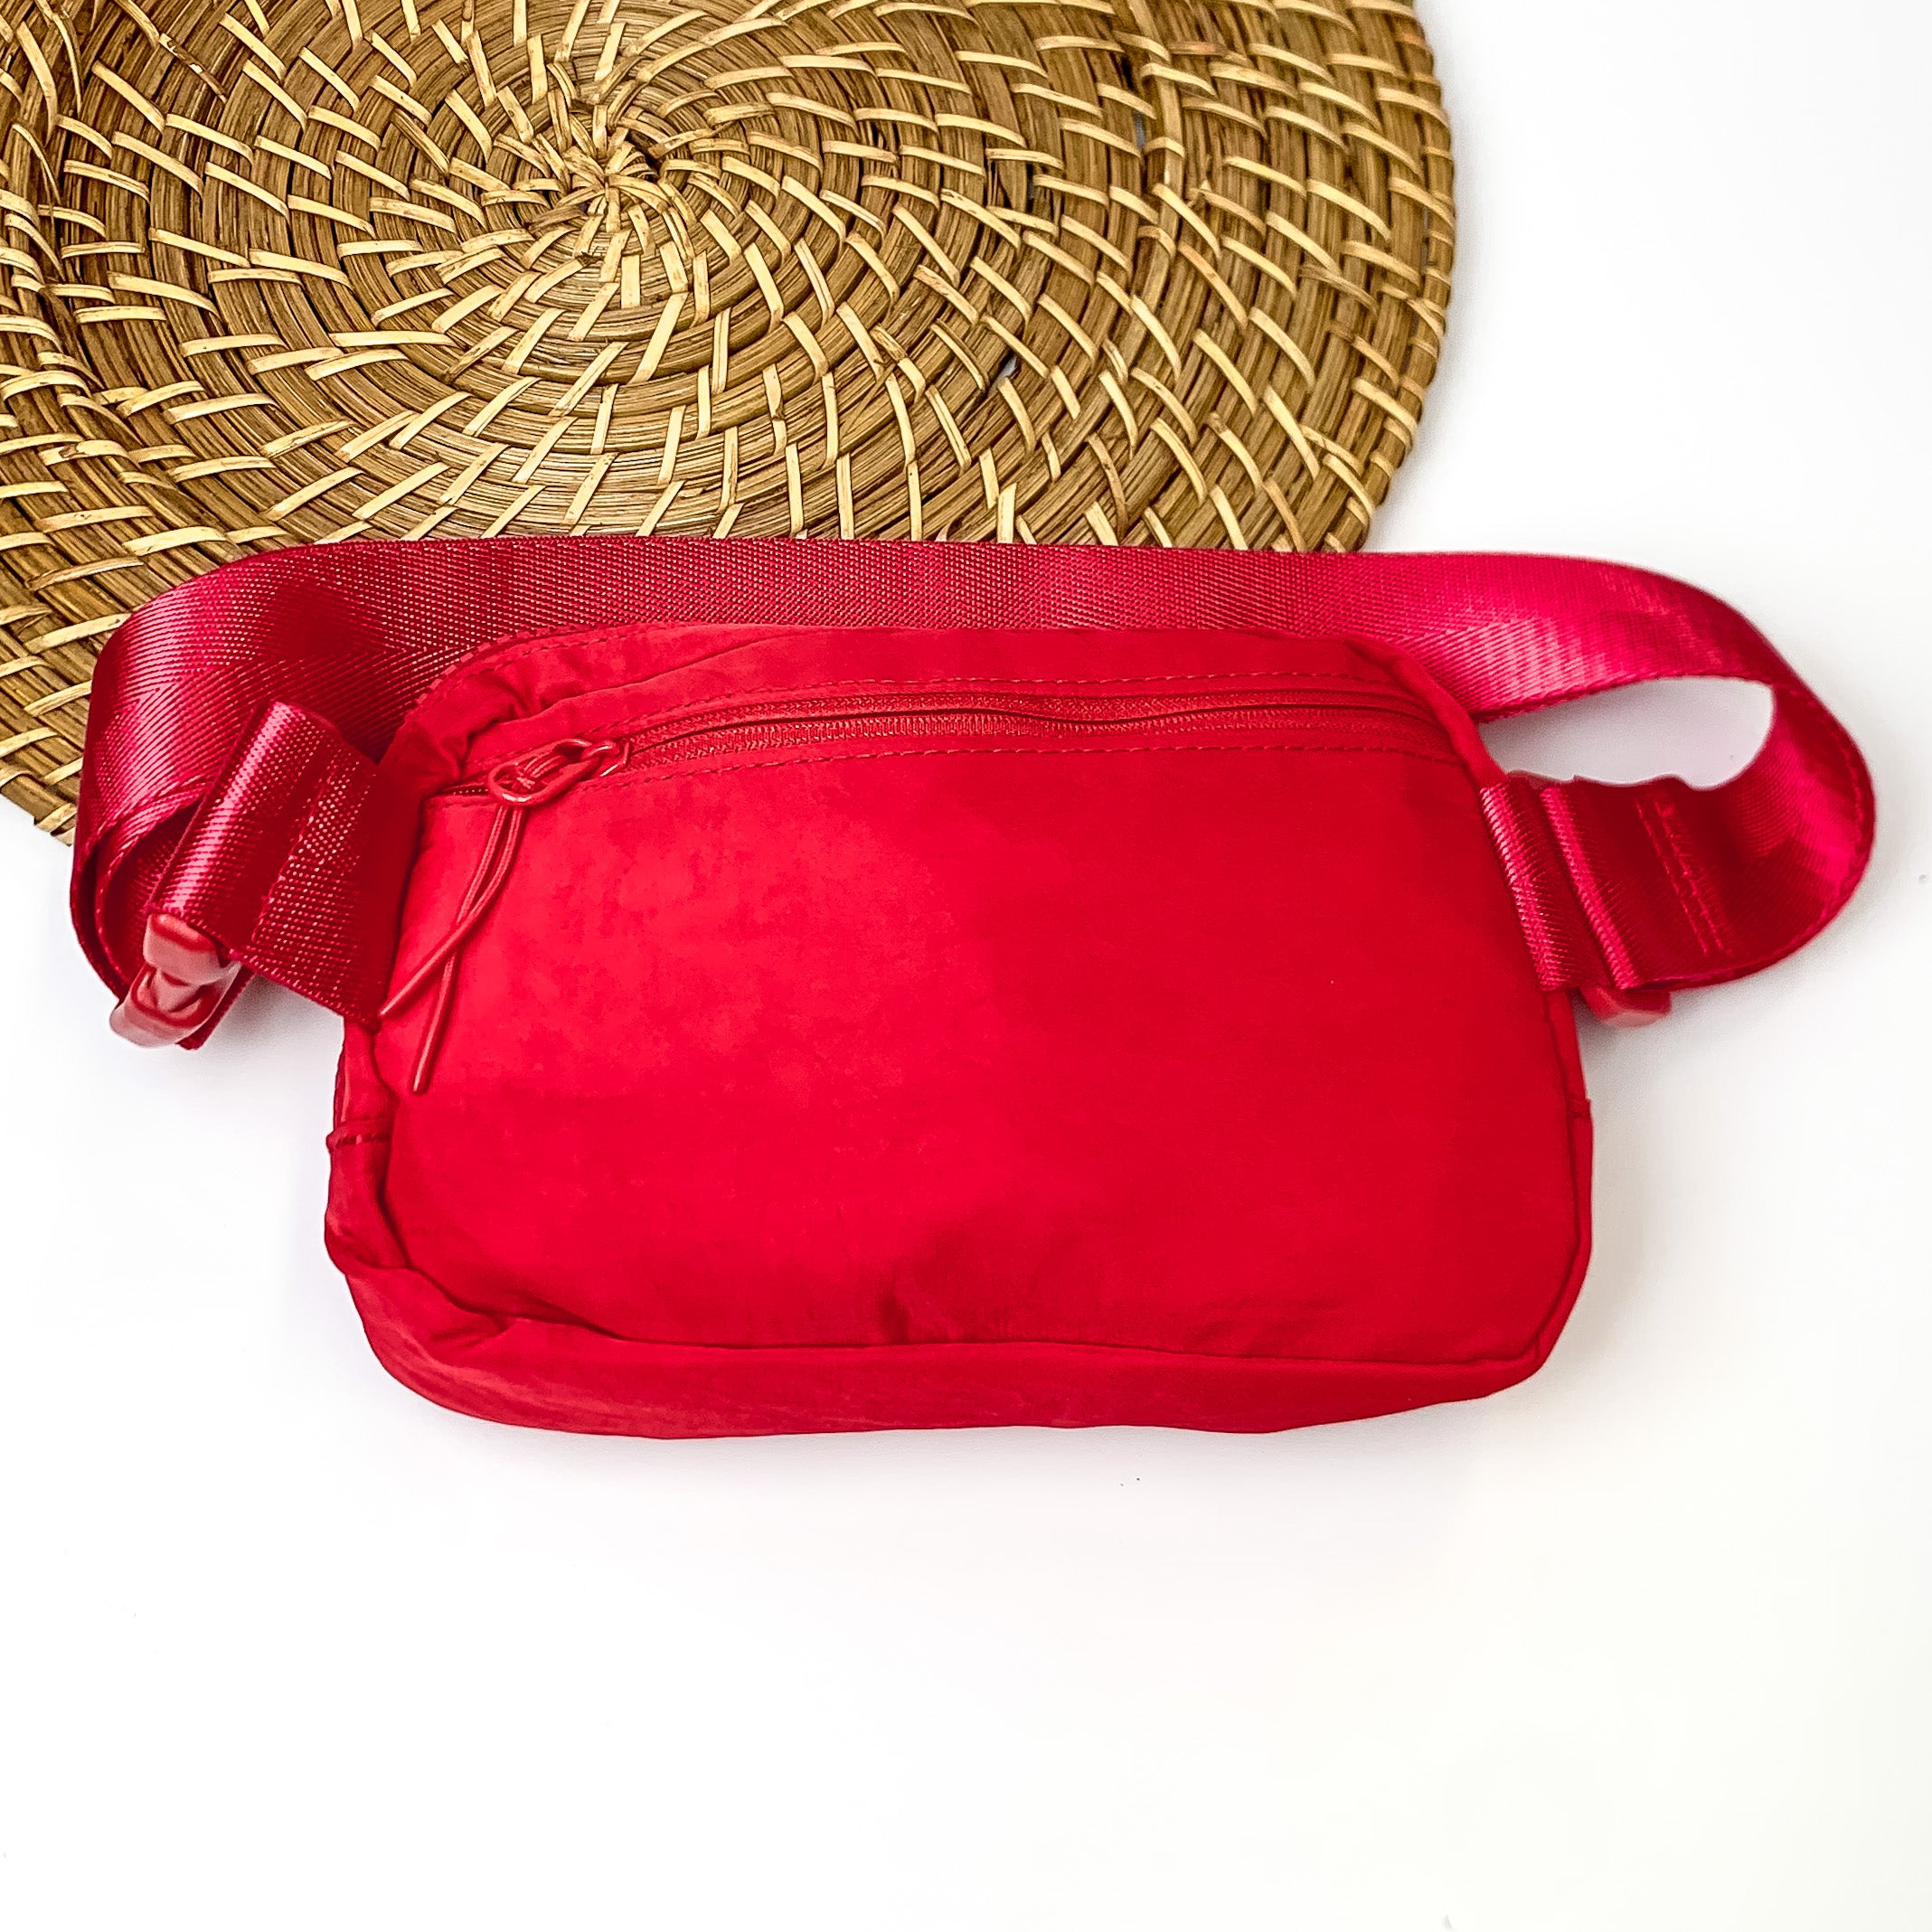 Love the Journey Fanny Pack in Red - Giddy Up Glamour Boutique